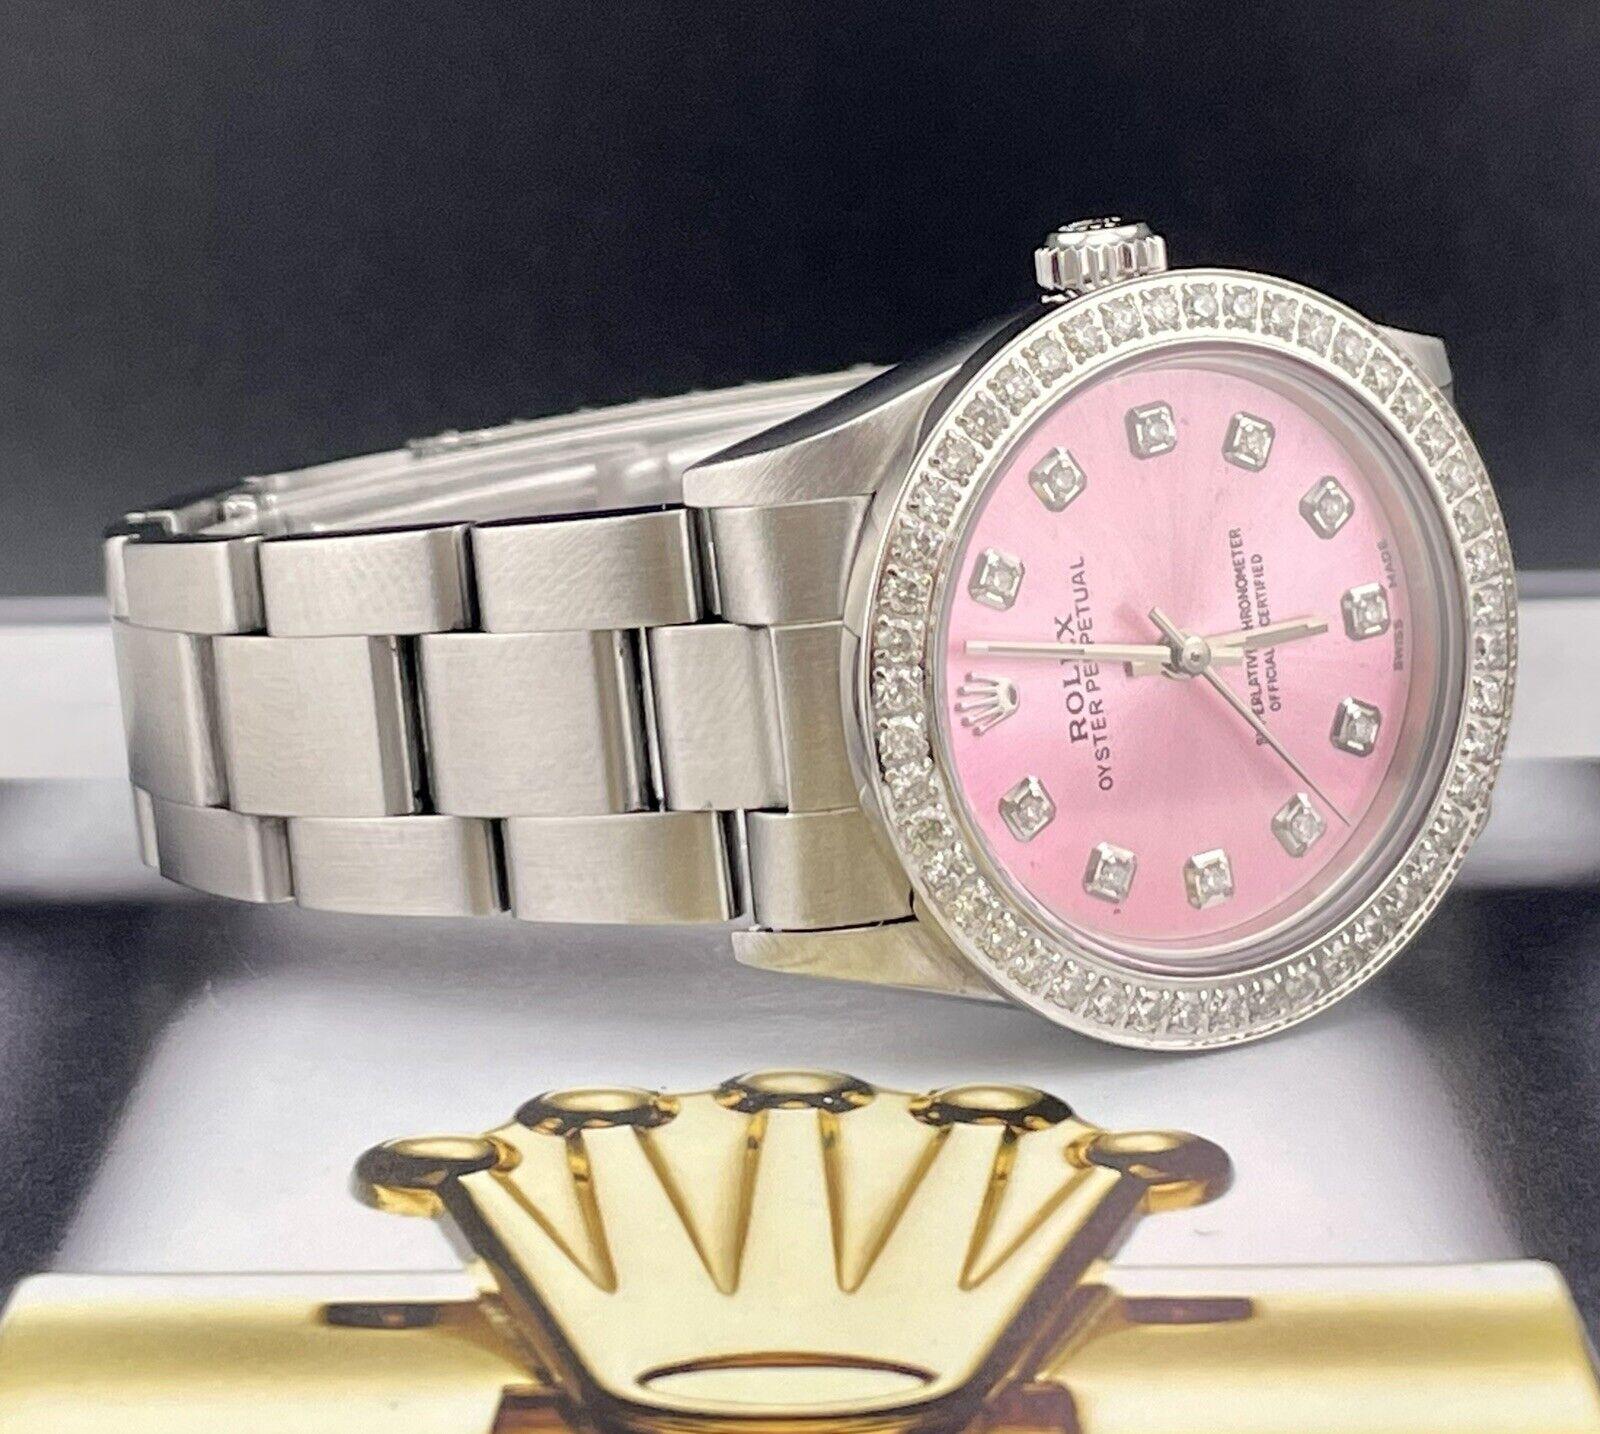 Rolex Oyster Perpetual 31mm Watch. A Pre-owned watch w/ Gift Box. Watch is 100% Authentic and Comes with Authenticity Card. Watch Reference is 67480 and is in Excellent Condition (See Pictures). The dial color is Pink (Have Other Colors!) and